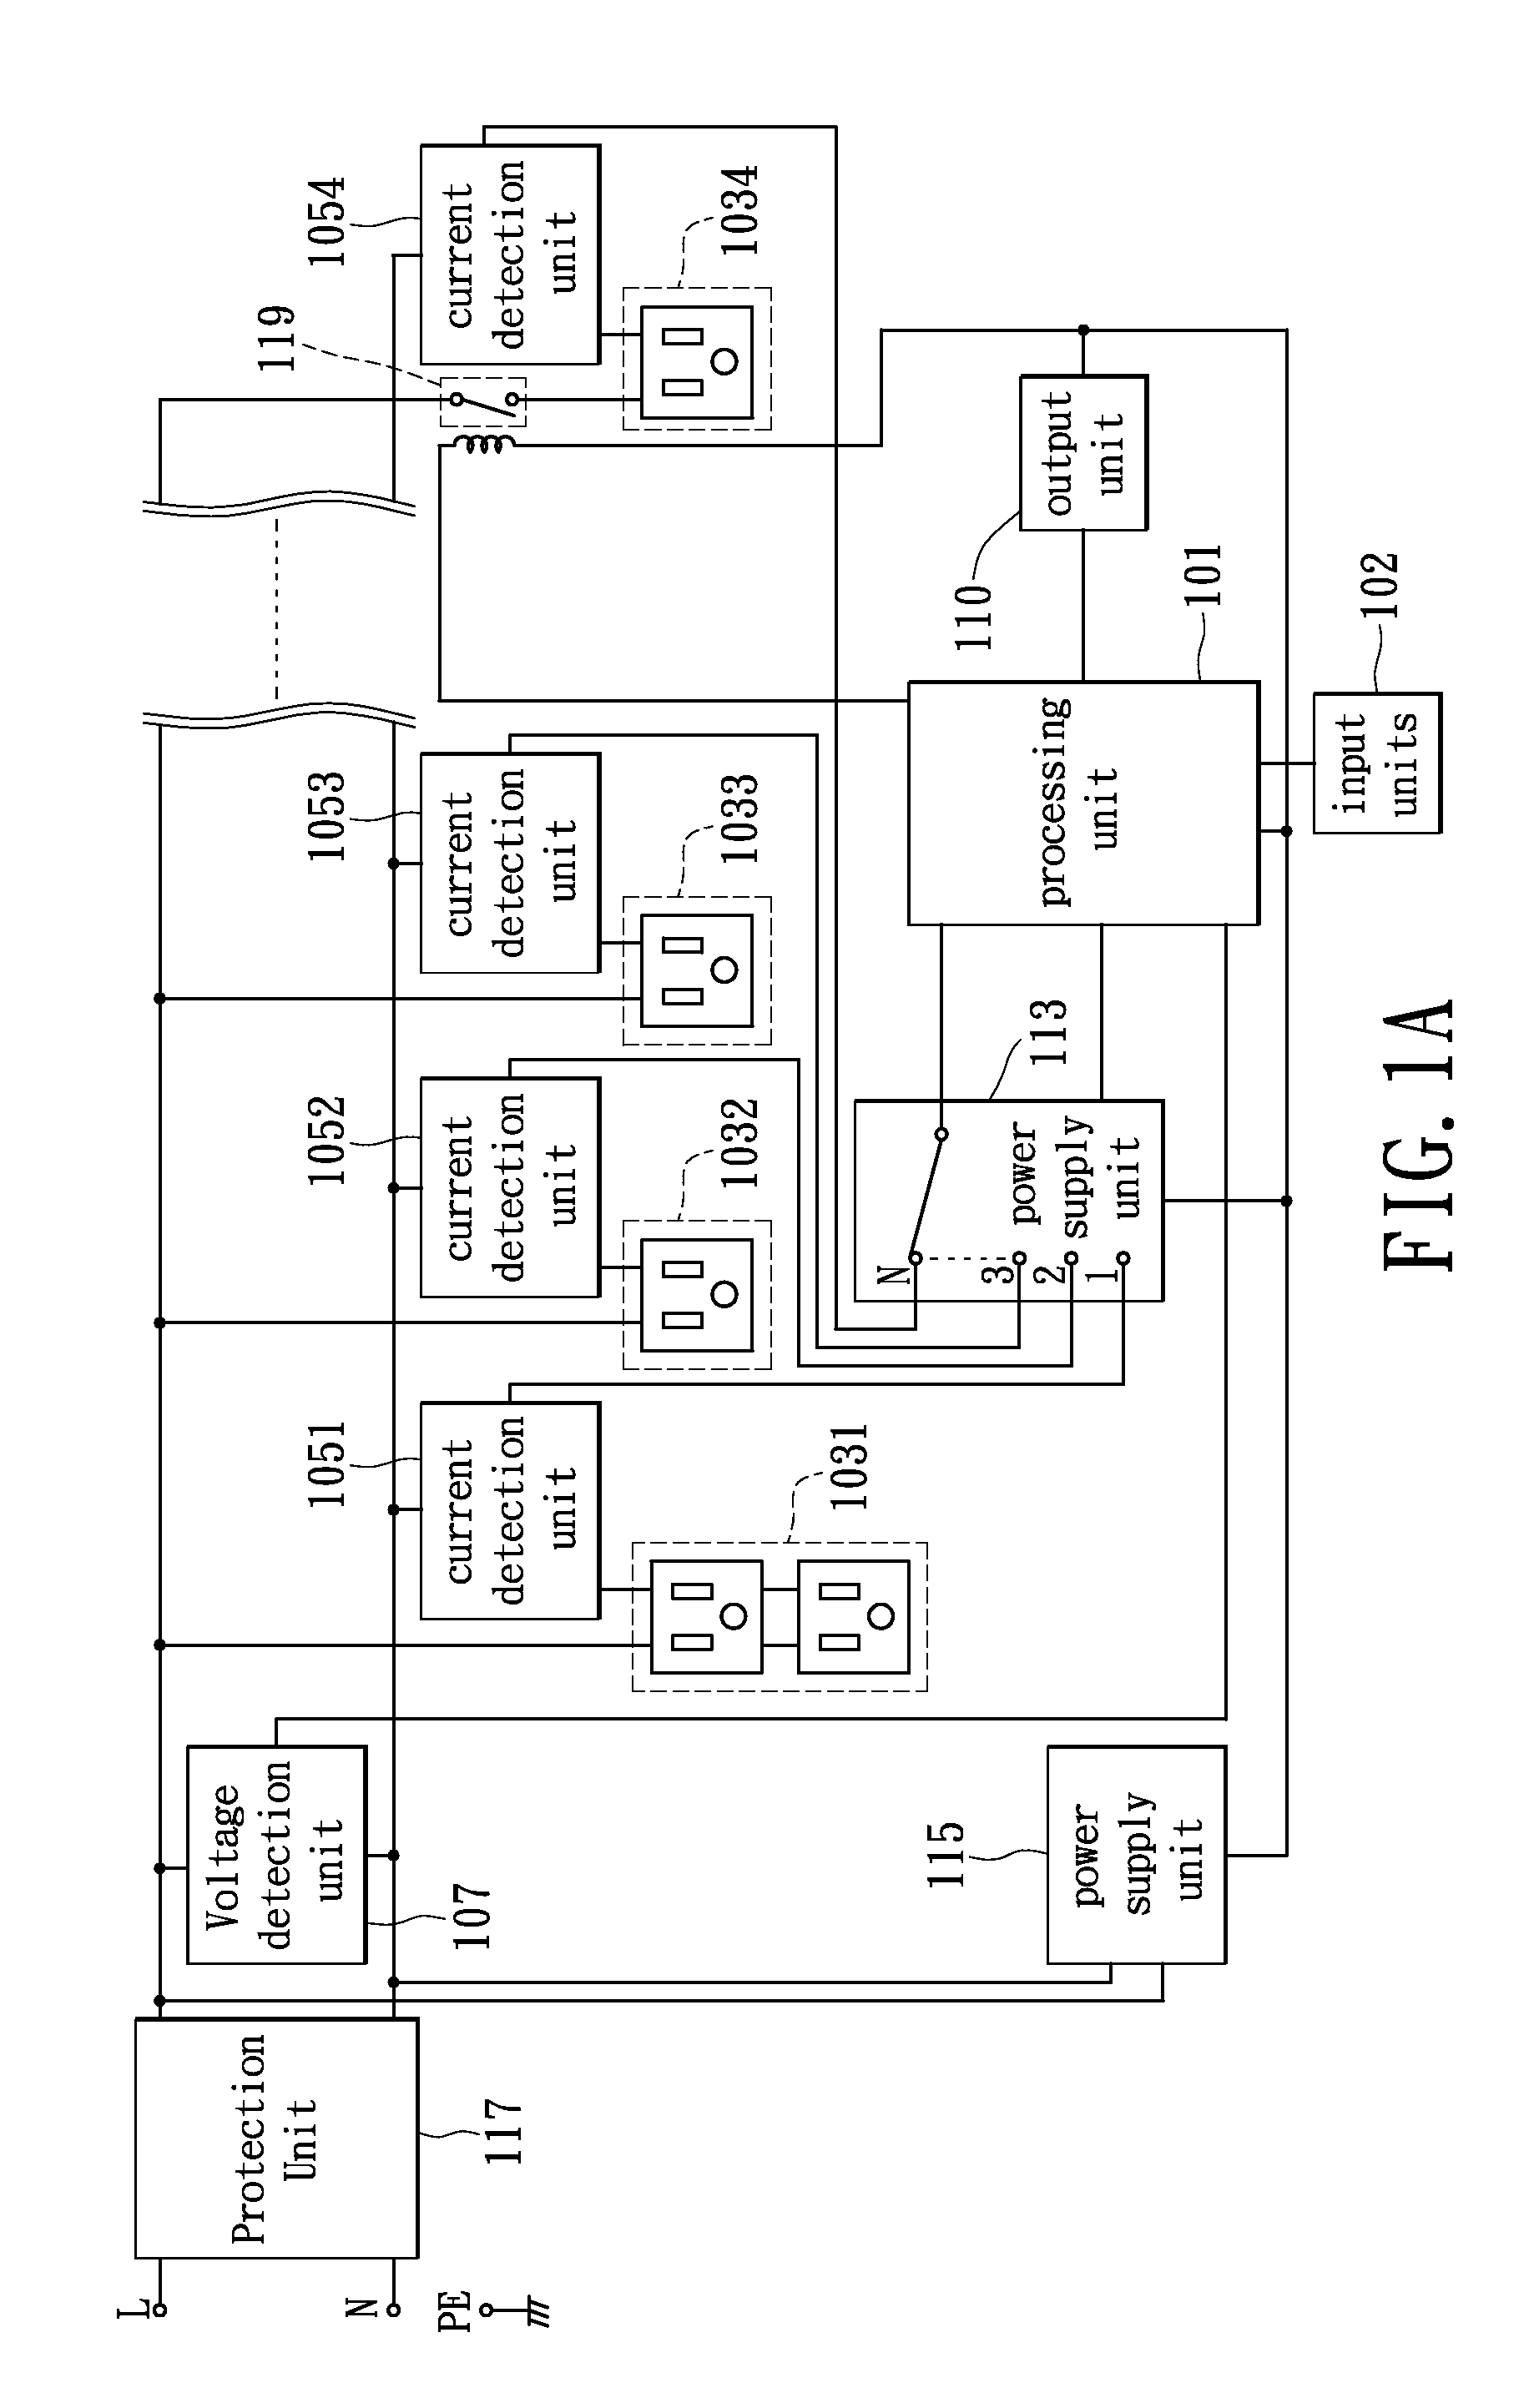 Power outlet apparatus with multiple sockets detection, and detection method thereof